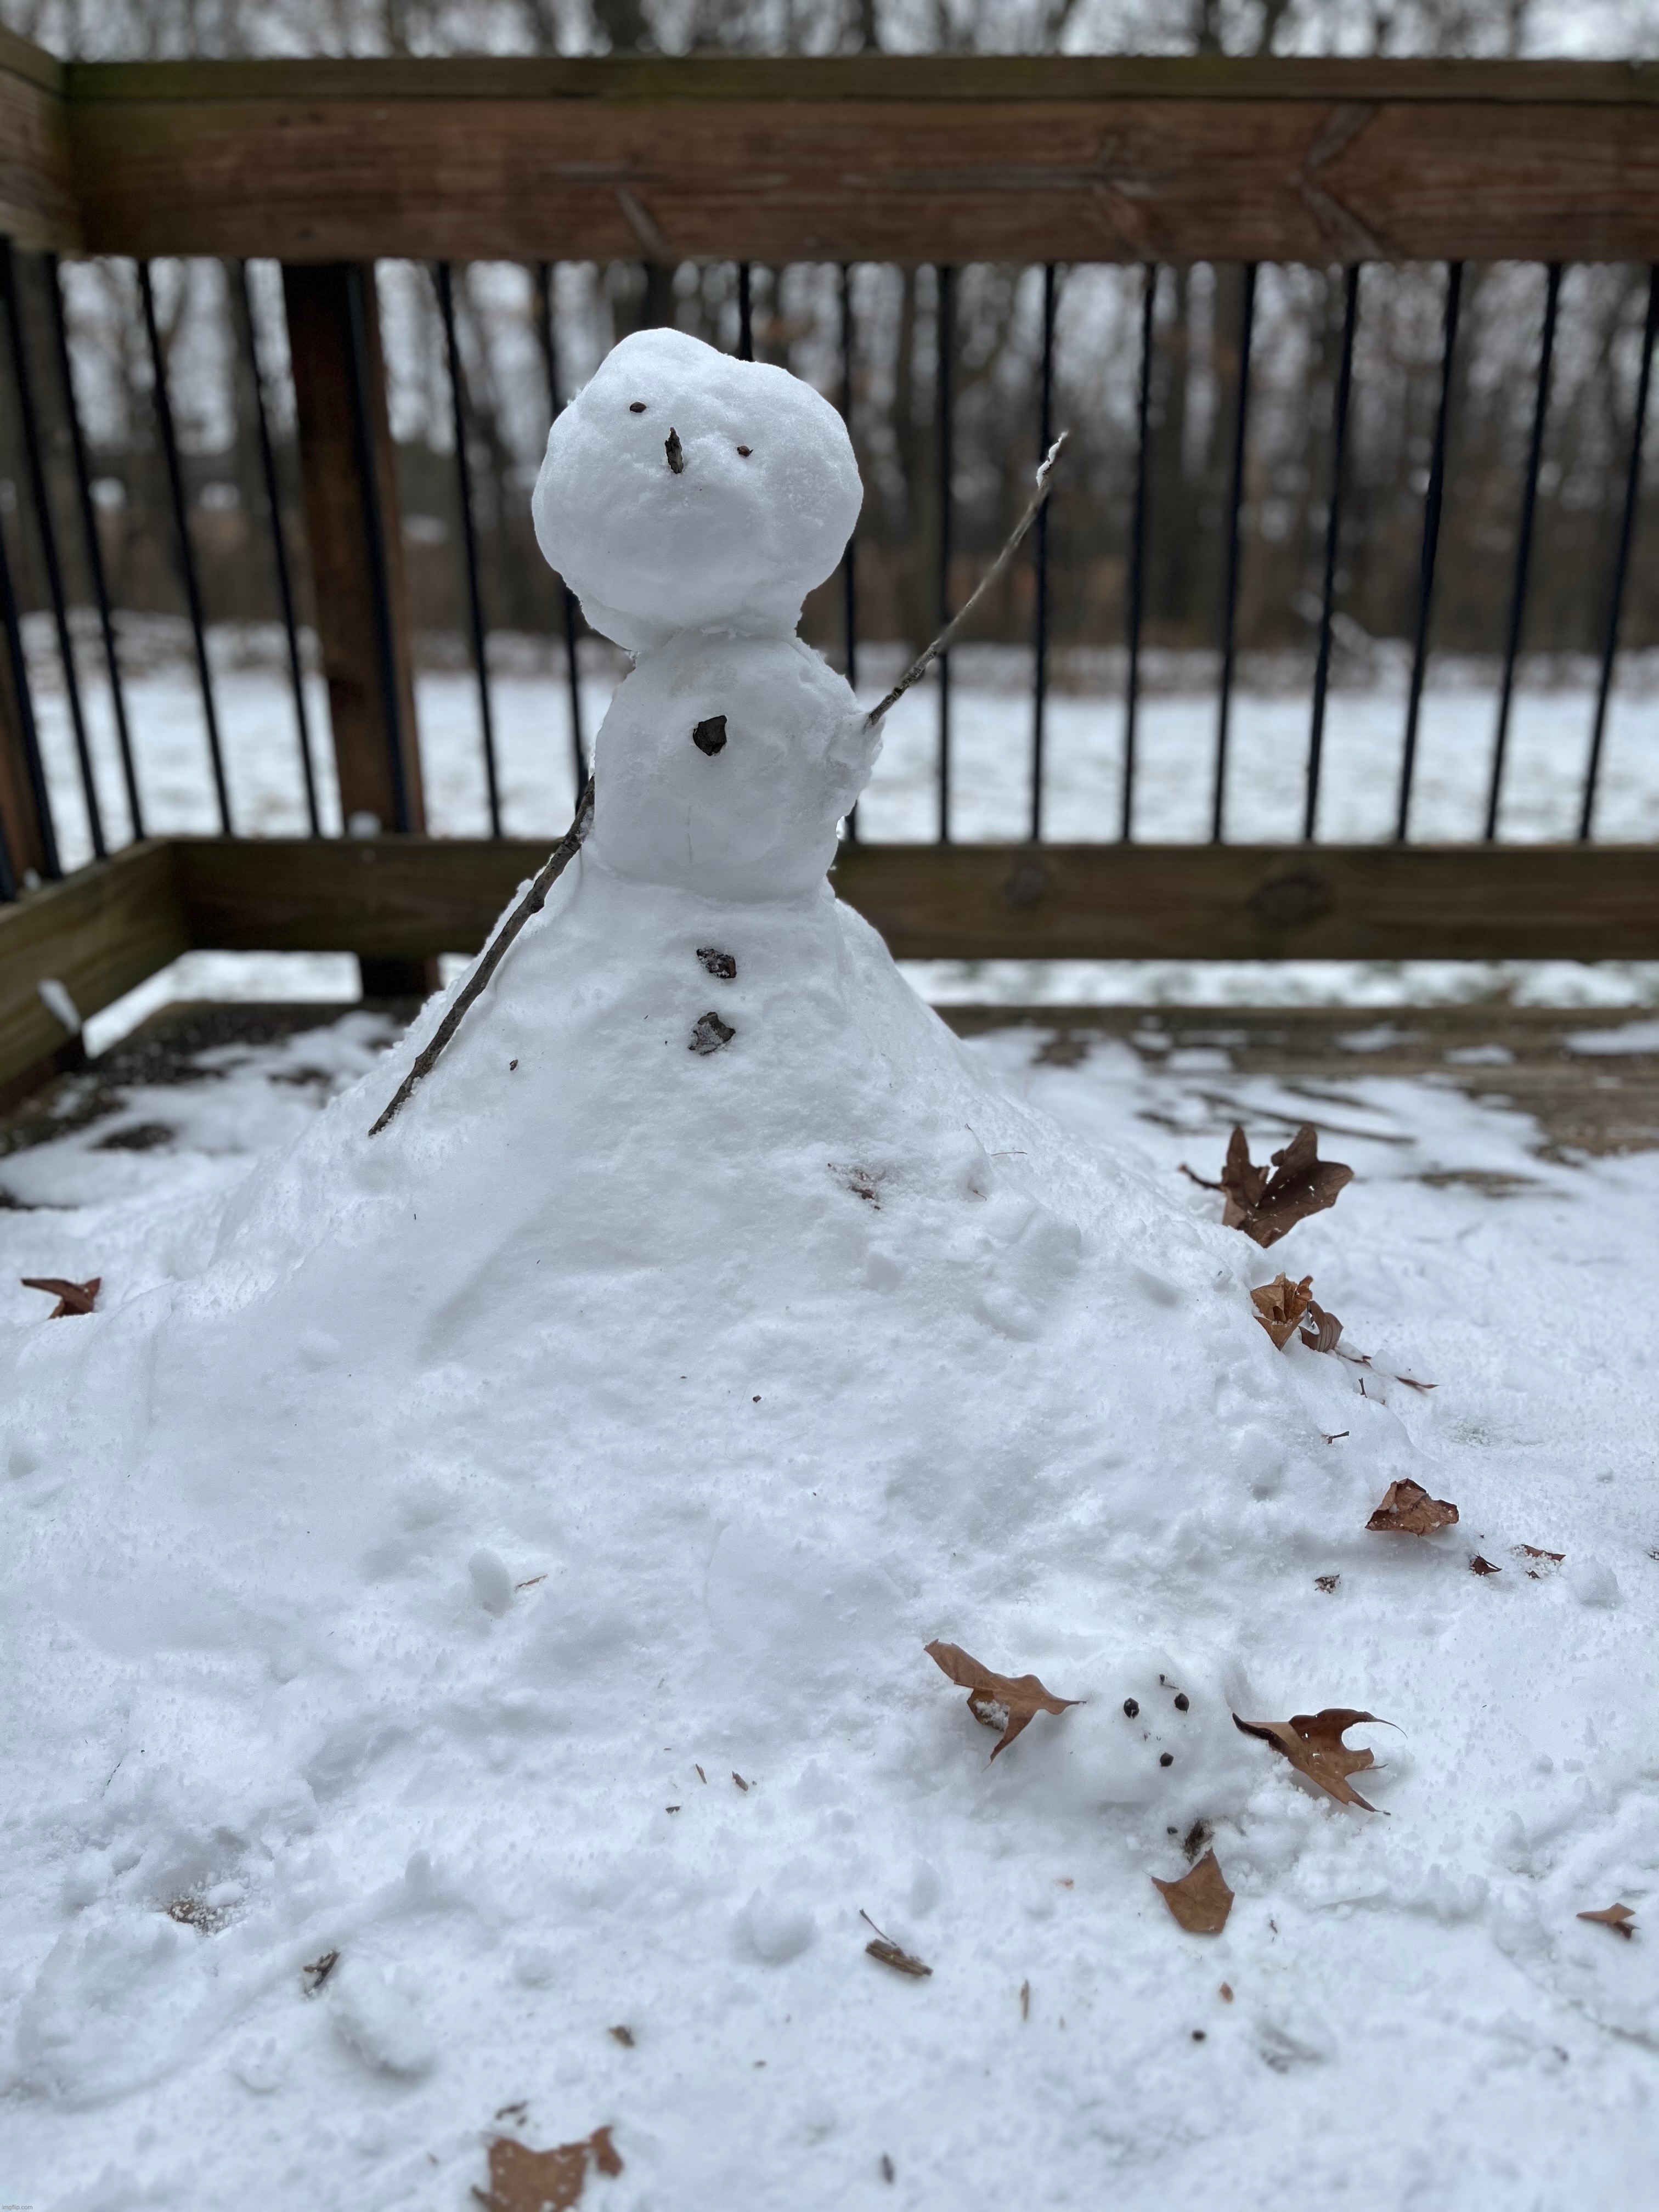 Here’s the snowman I finished to make | image tagged in snow,snowman,creation | made w/ Imgflip meme maker